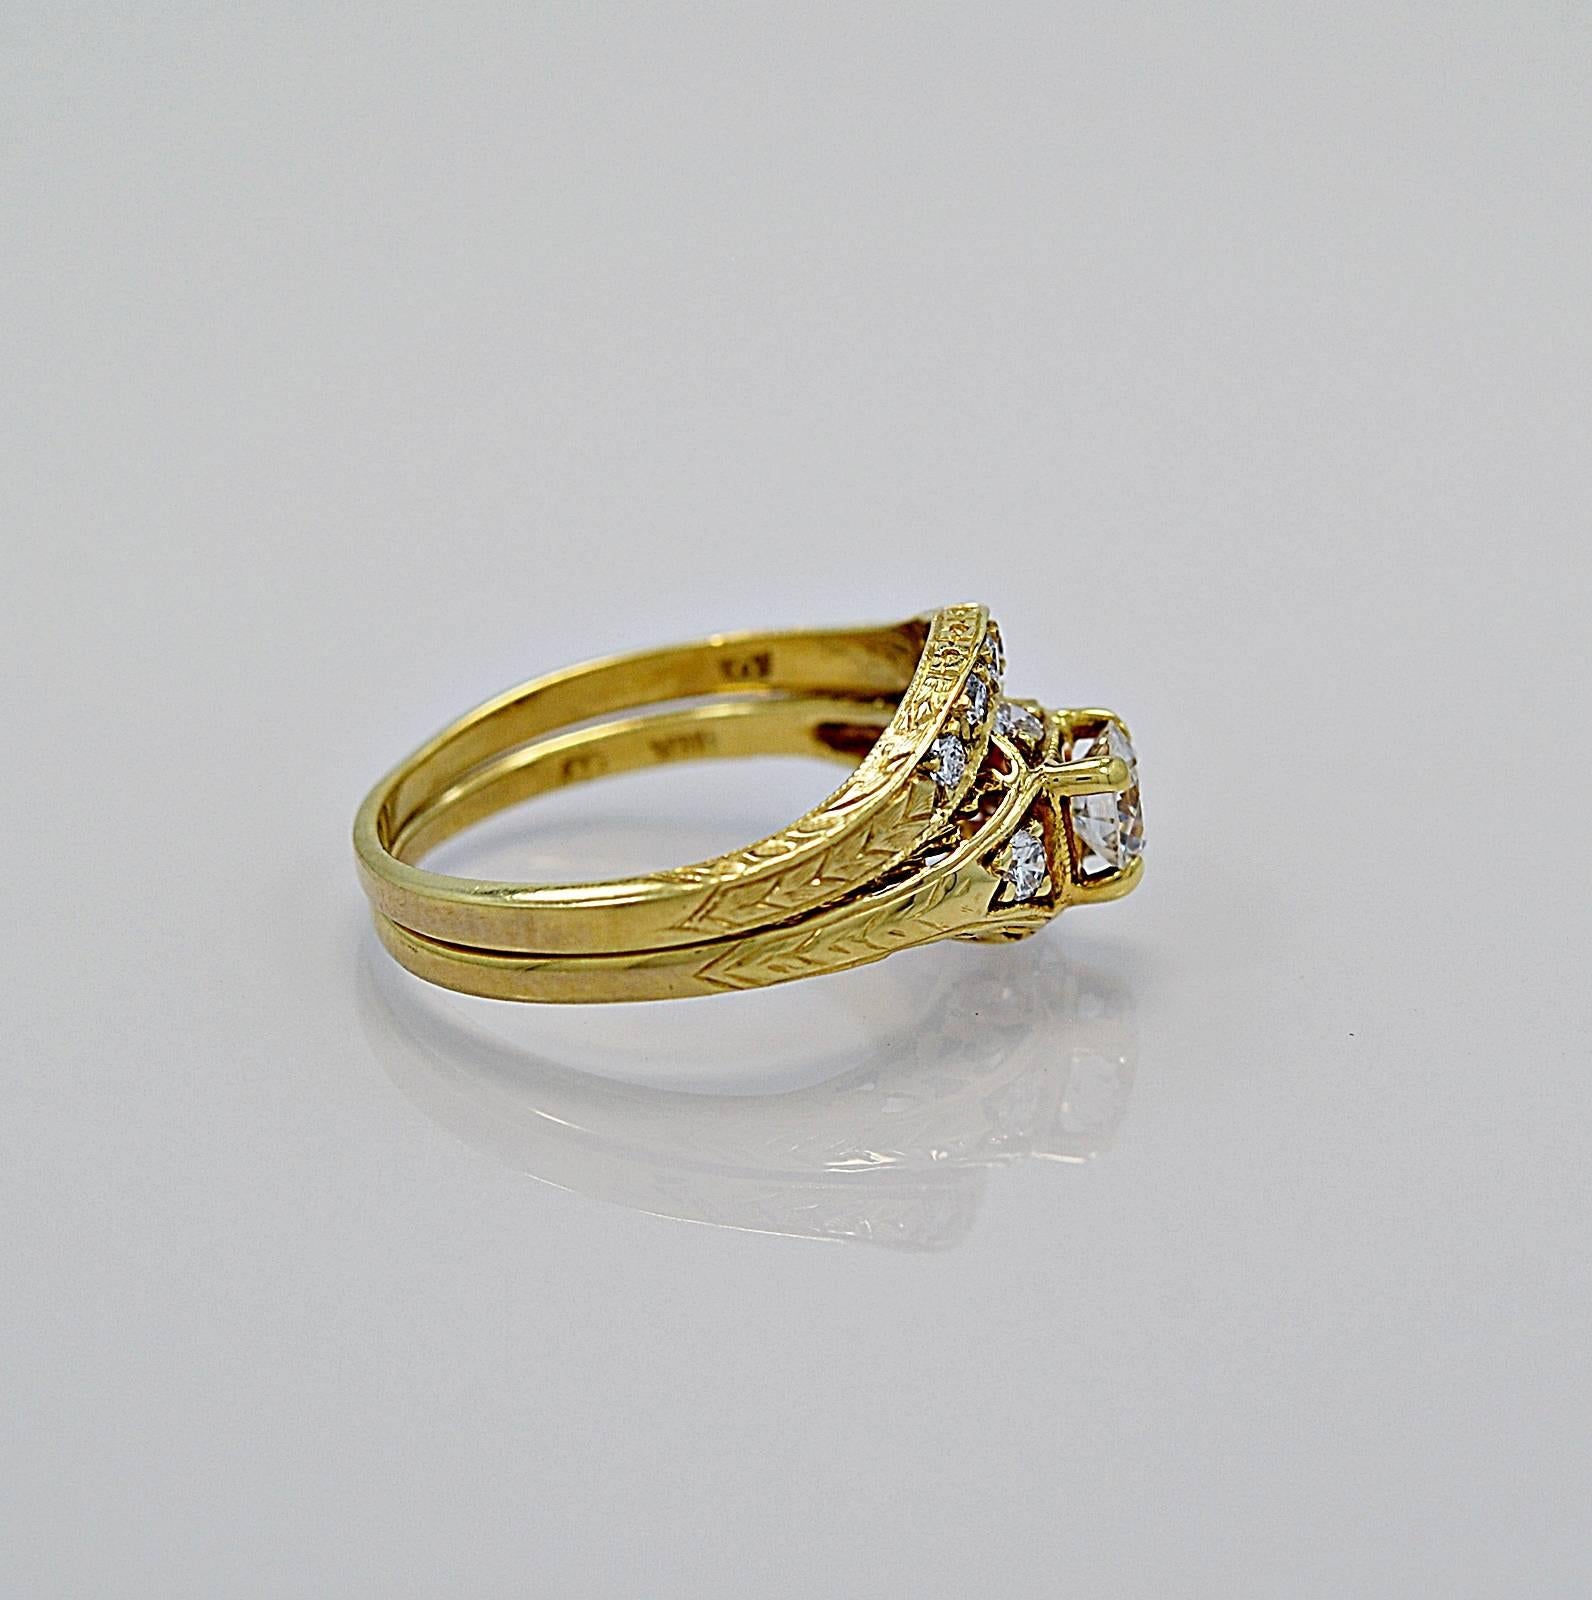 An engagement ring set crafted in 18K yellow gold (made by 